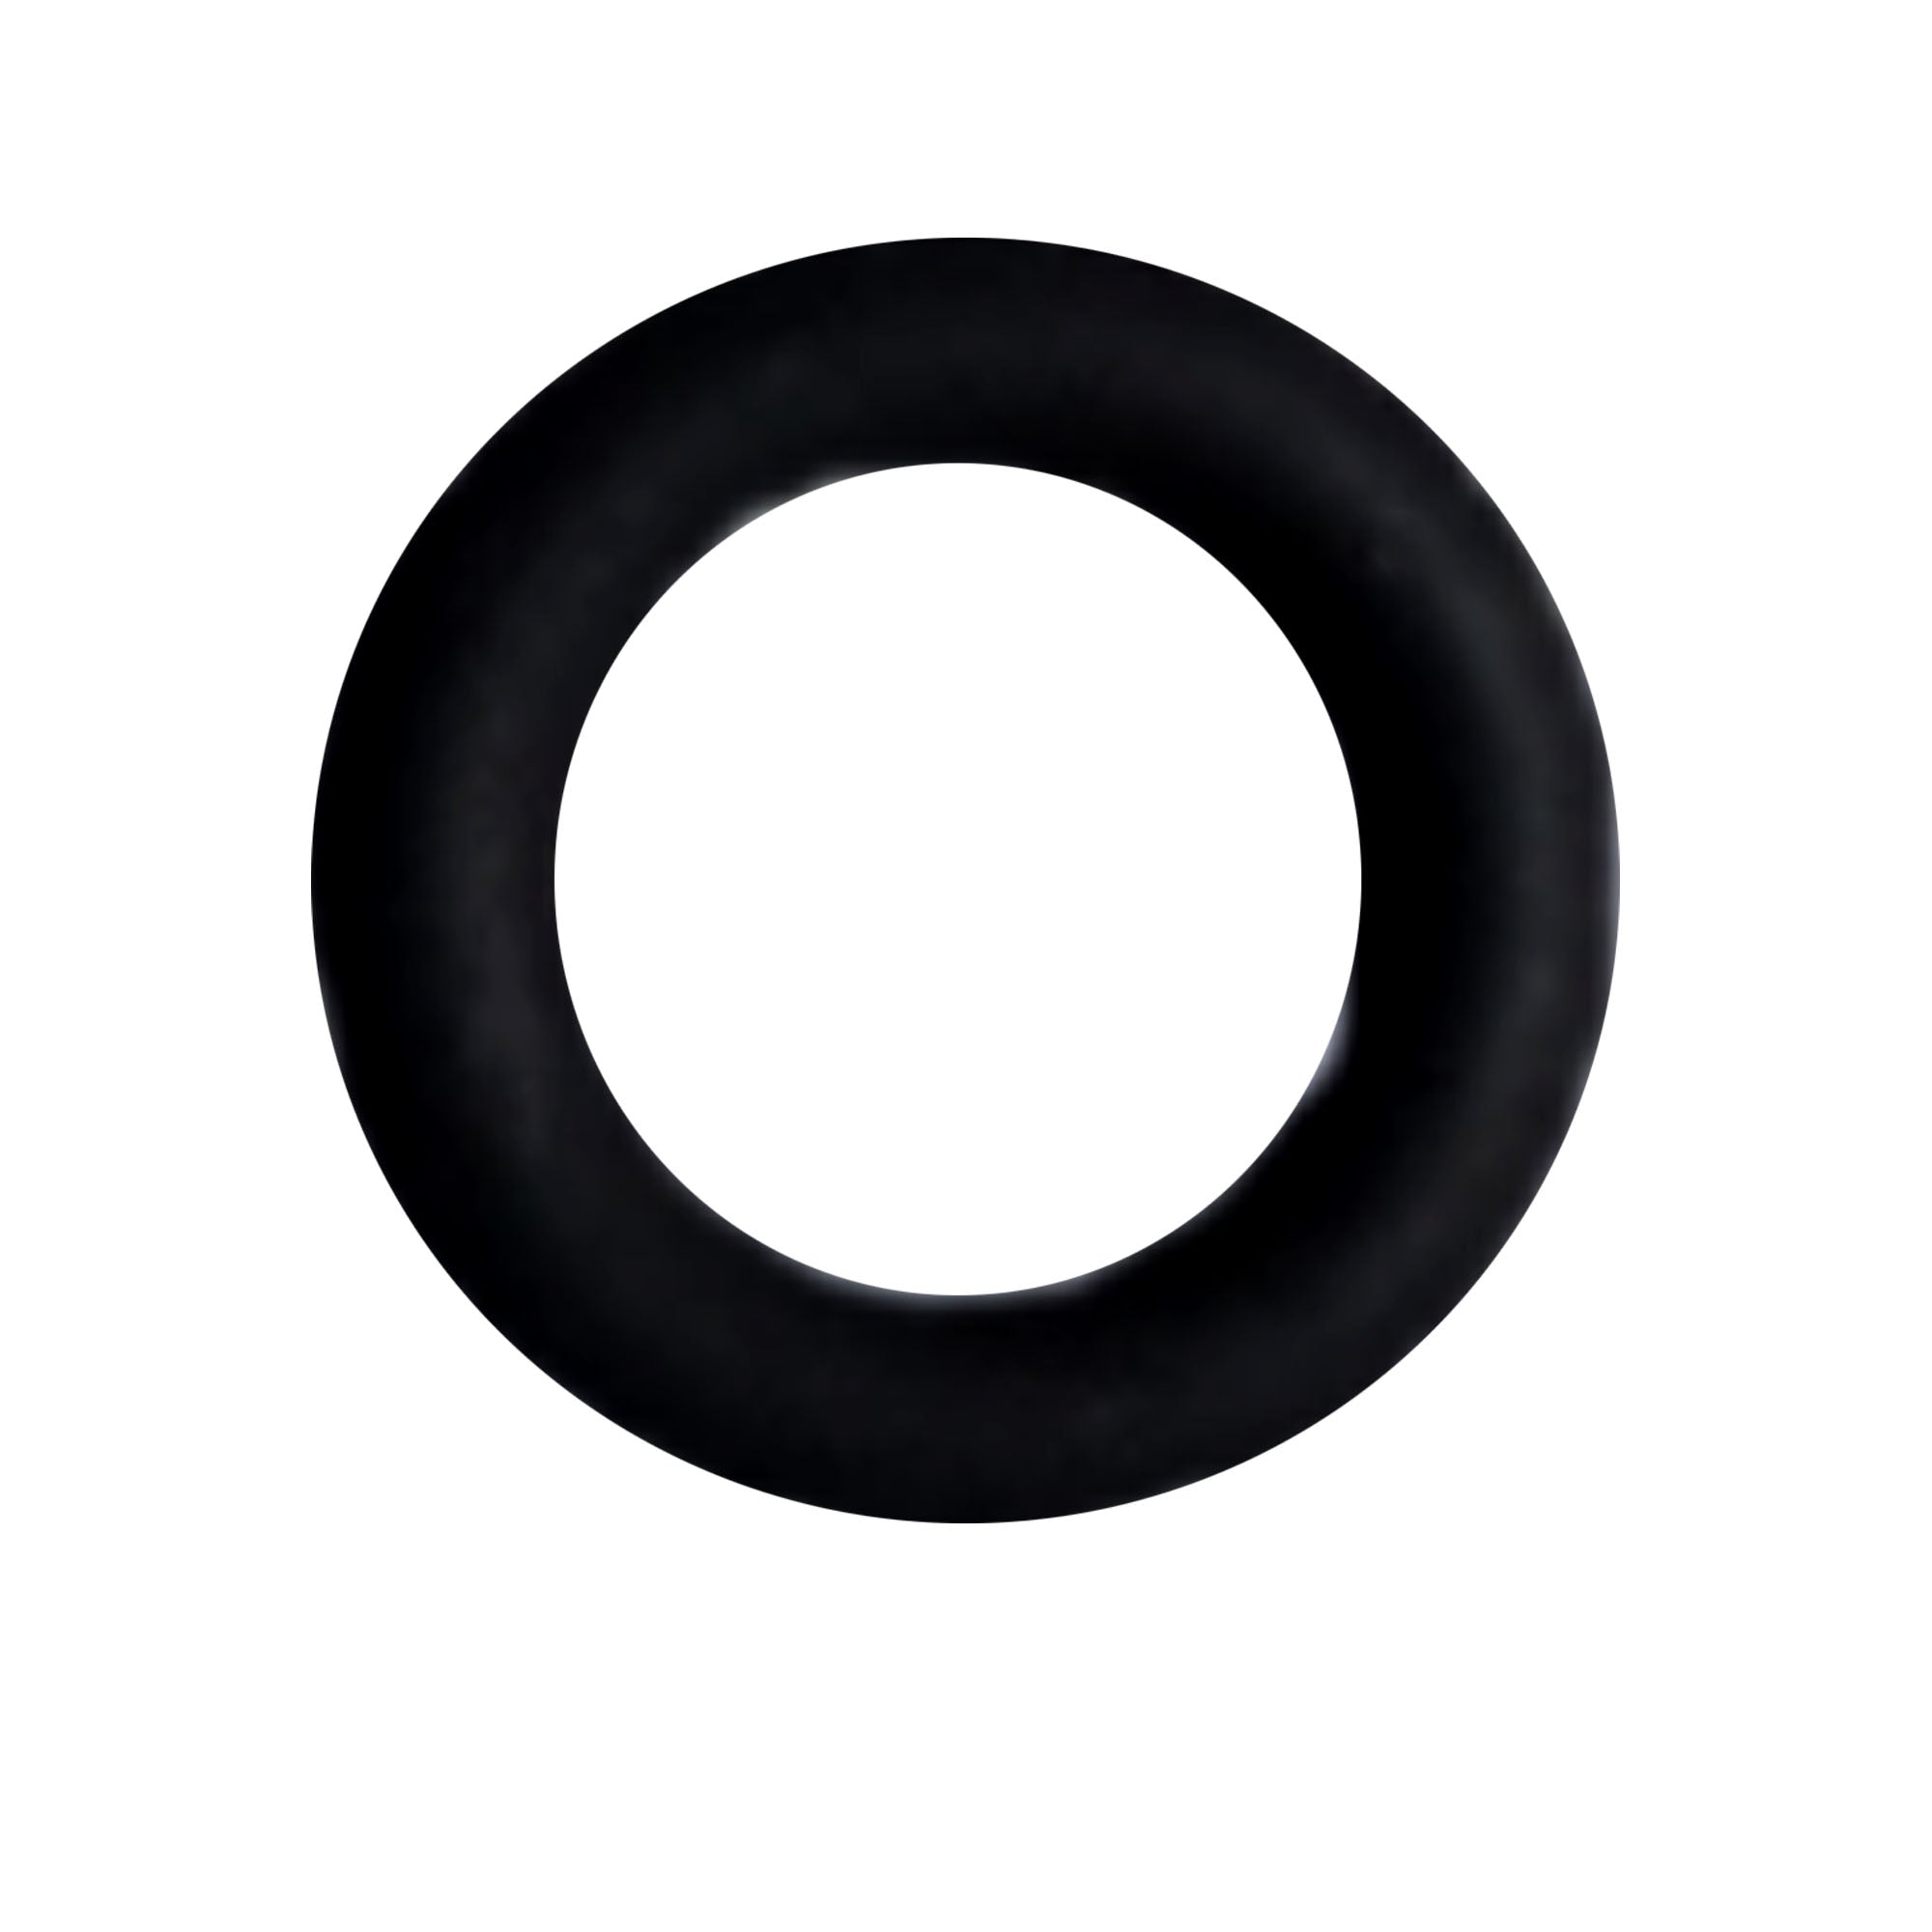 248648 - O-Ring, Pack of 6 - PURspray